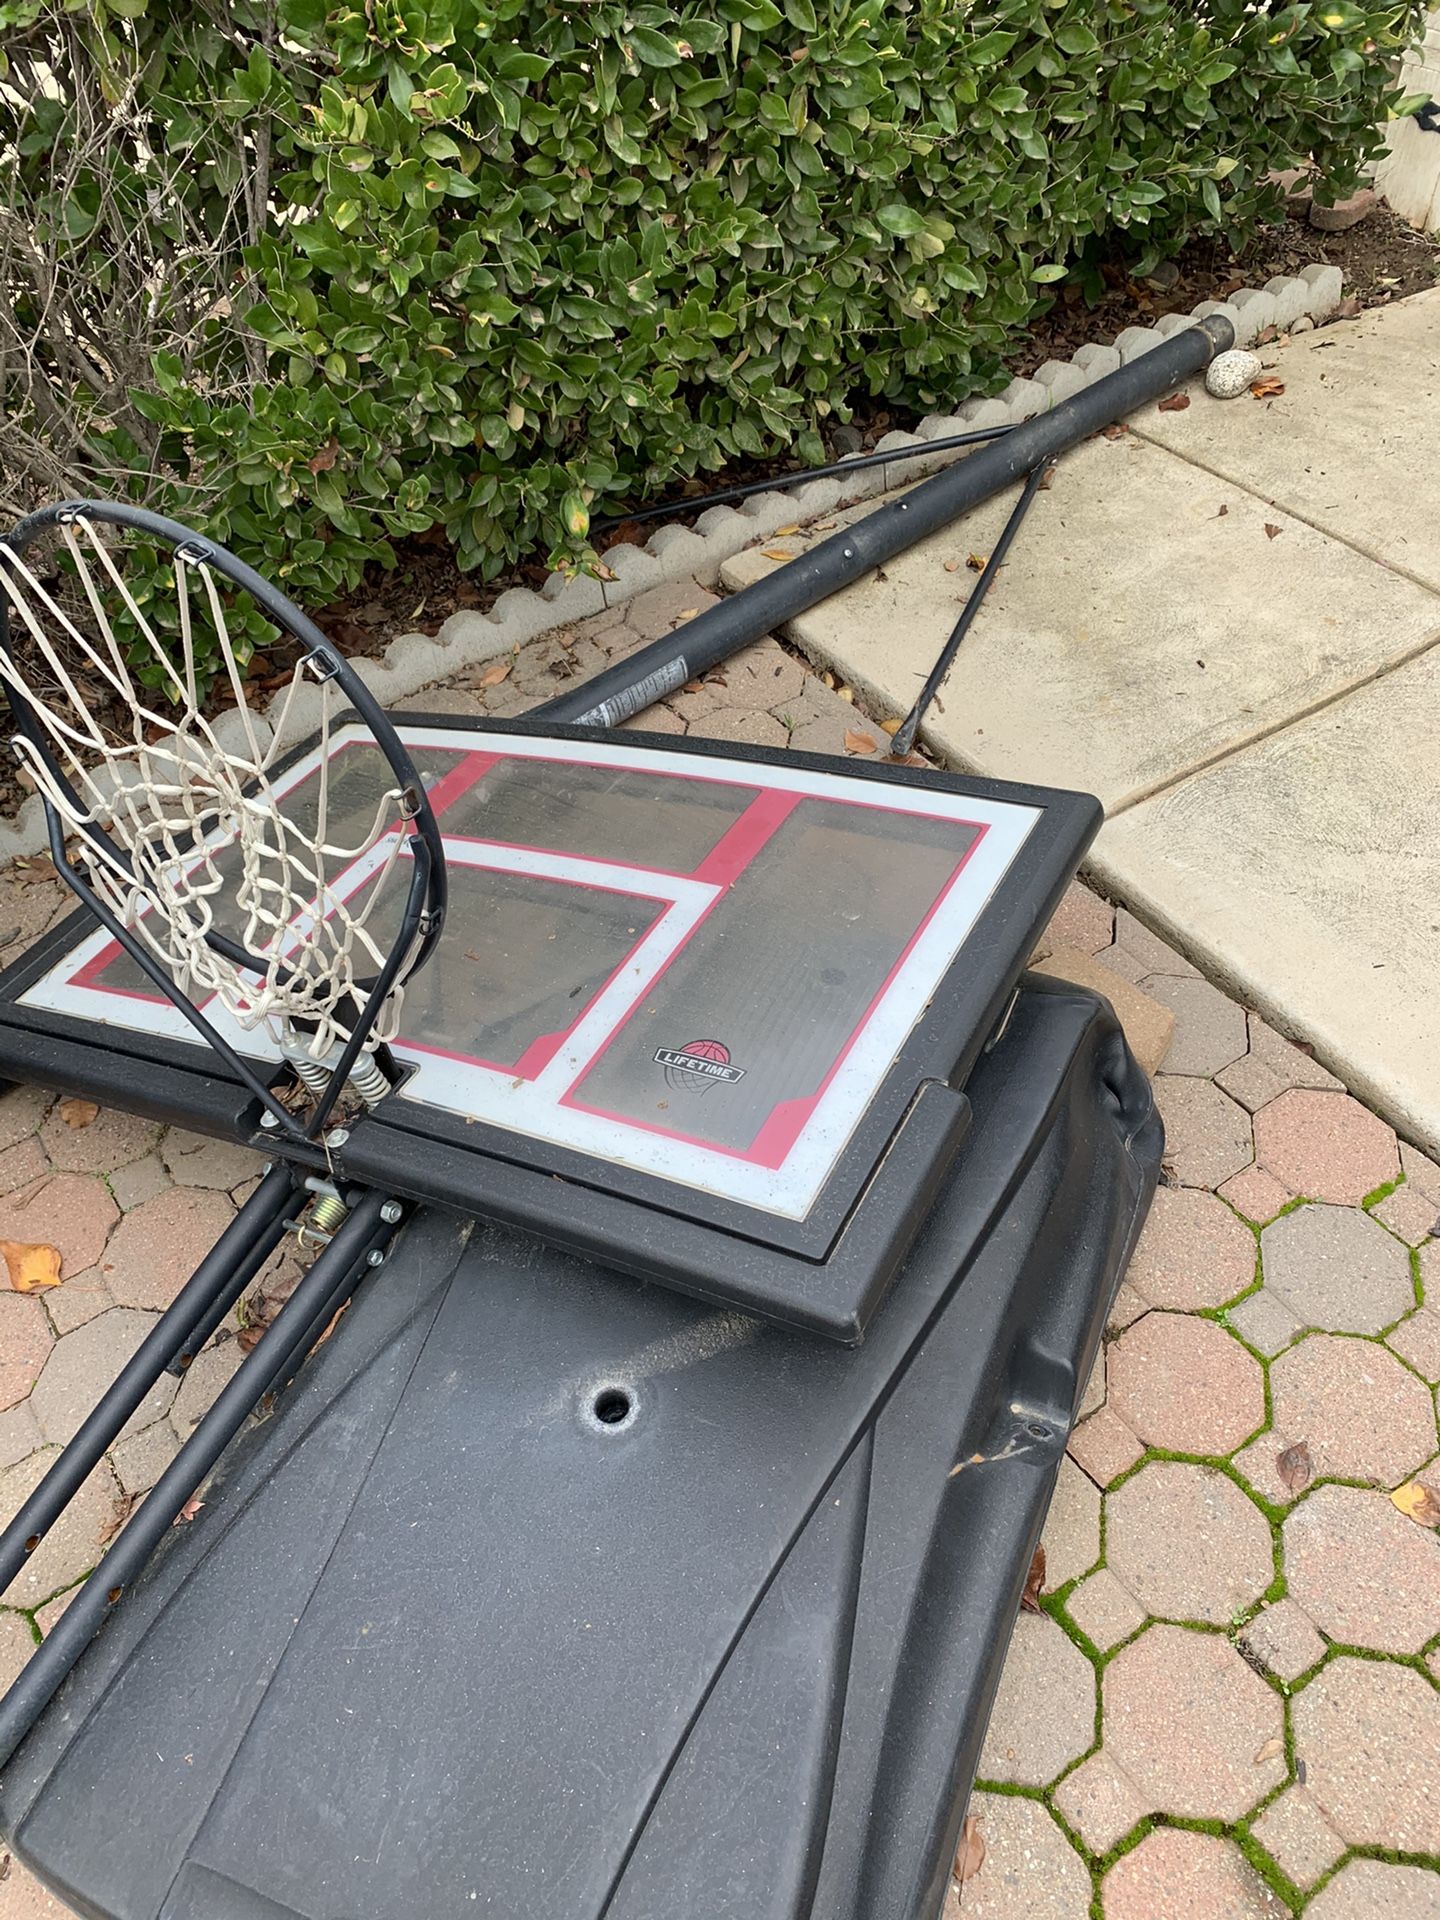 Basketball Hoop for sale. All parts are accounted for. Yours for $100